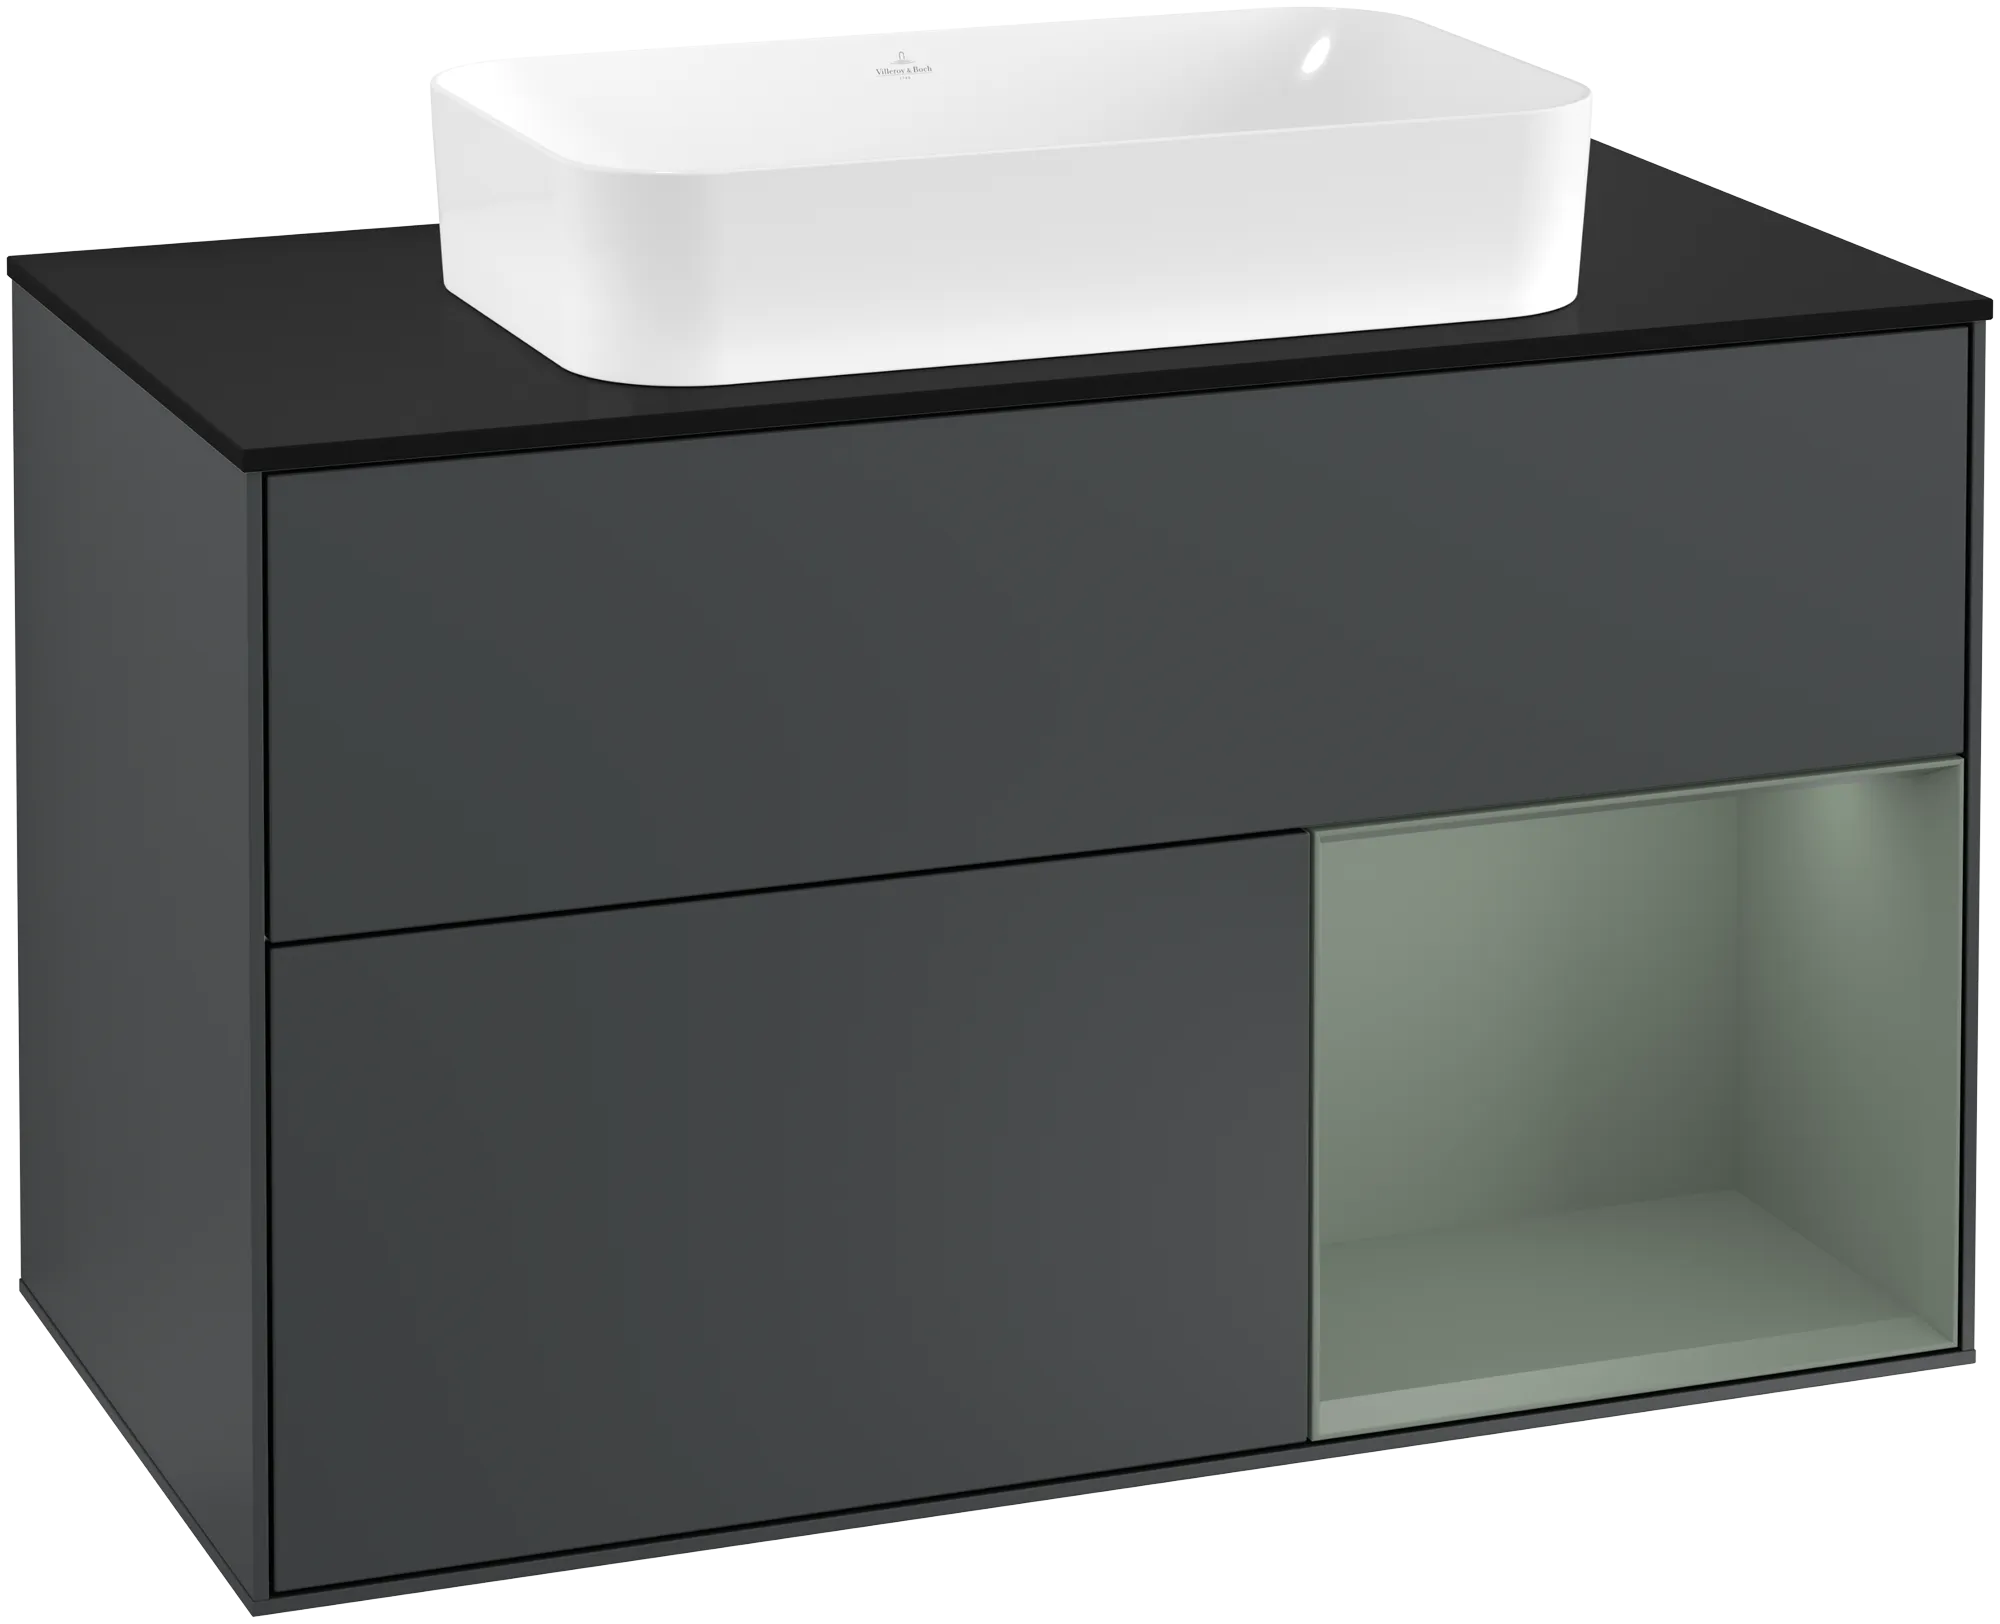 Picture of VILLEROY BOCH Finion Vanity unit, with lighting, 2 pull-out compartments, 1000 x 603 x 501 mm, Midnight Blue Matt Lacquer / Olive Matt Lacquer / Glass Black Matt #G252GMHG